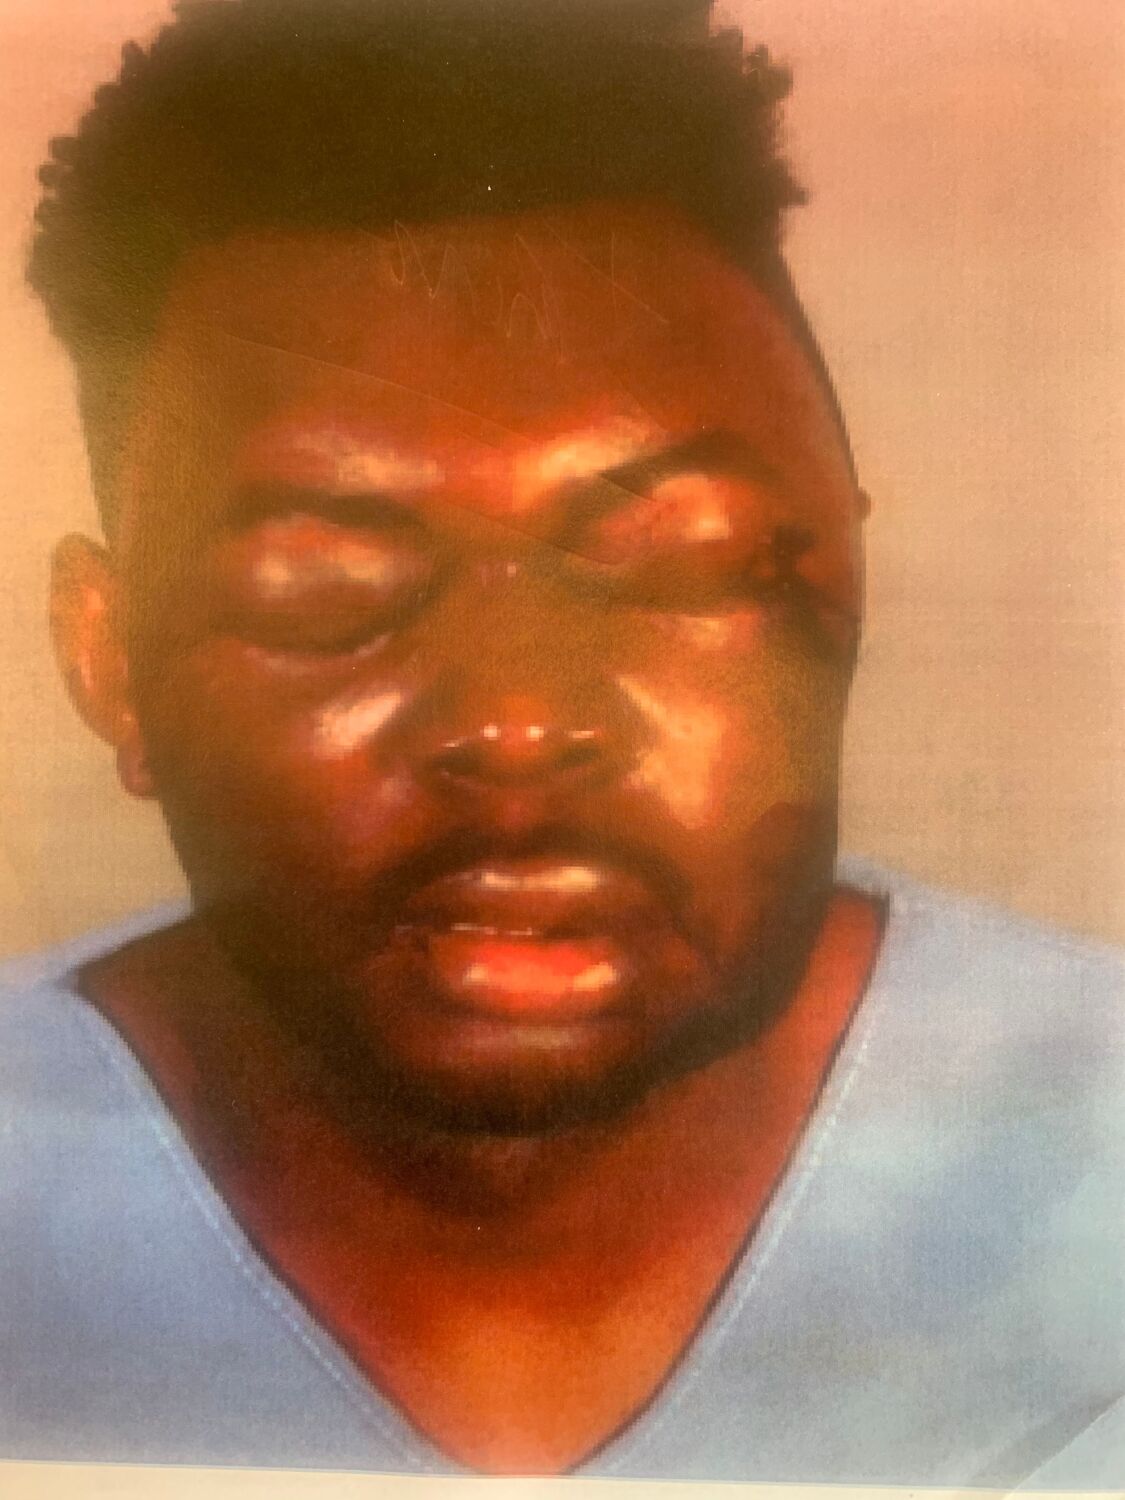 Lawsuit alleges L.A. County sheriff's deputies beat Black man during traffic stop